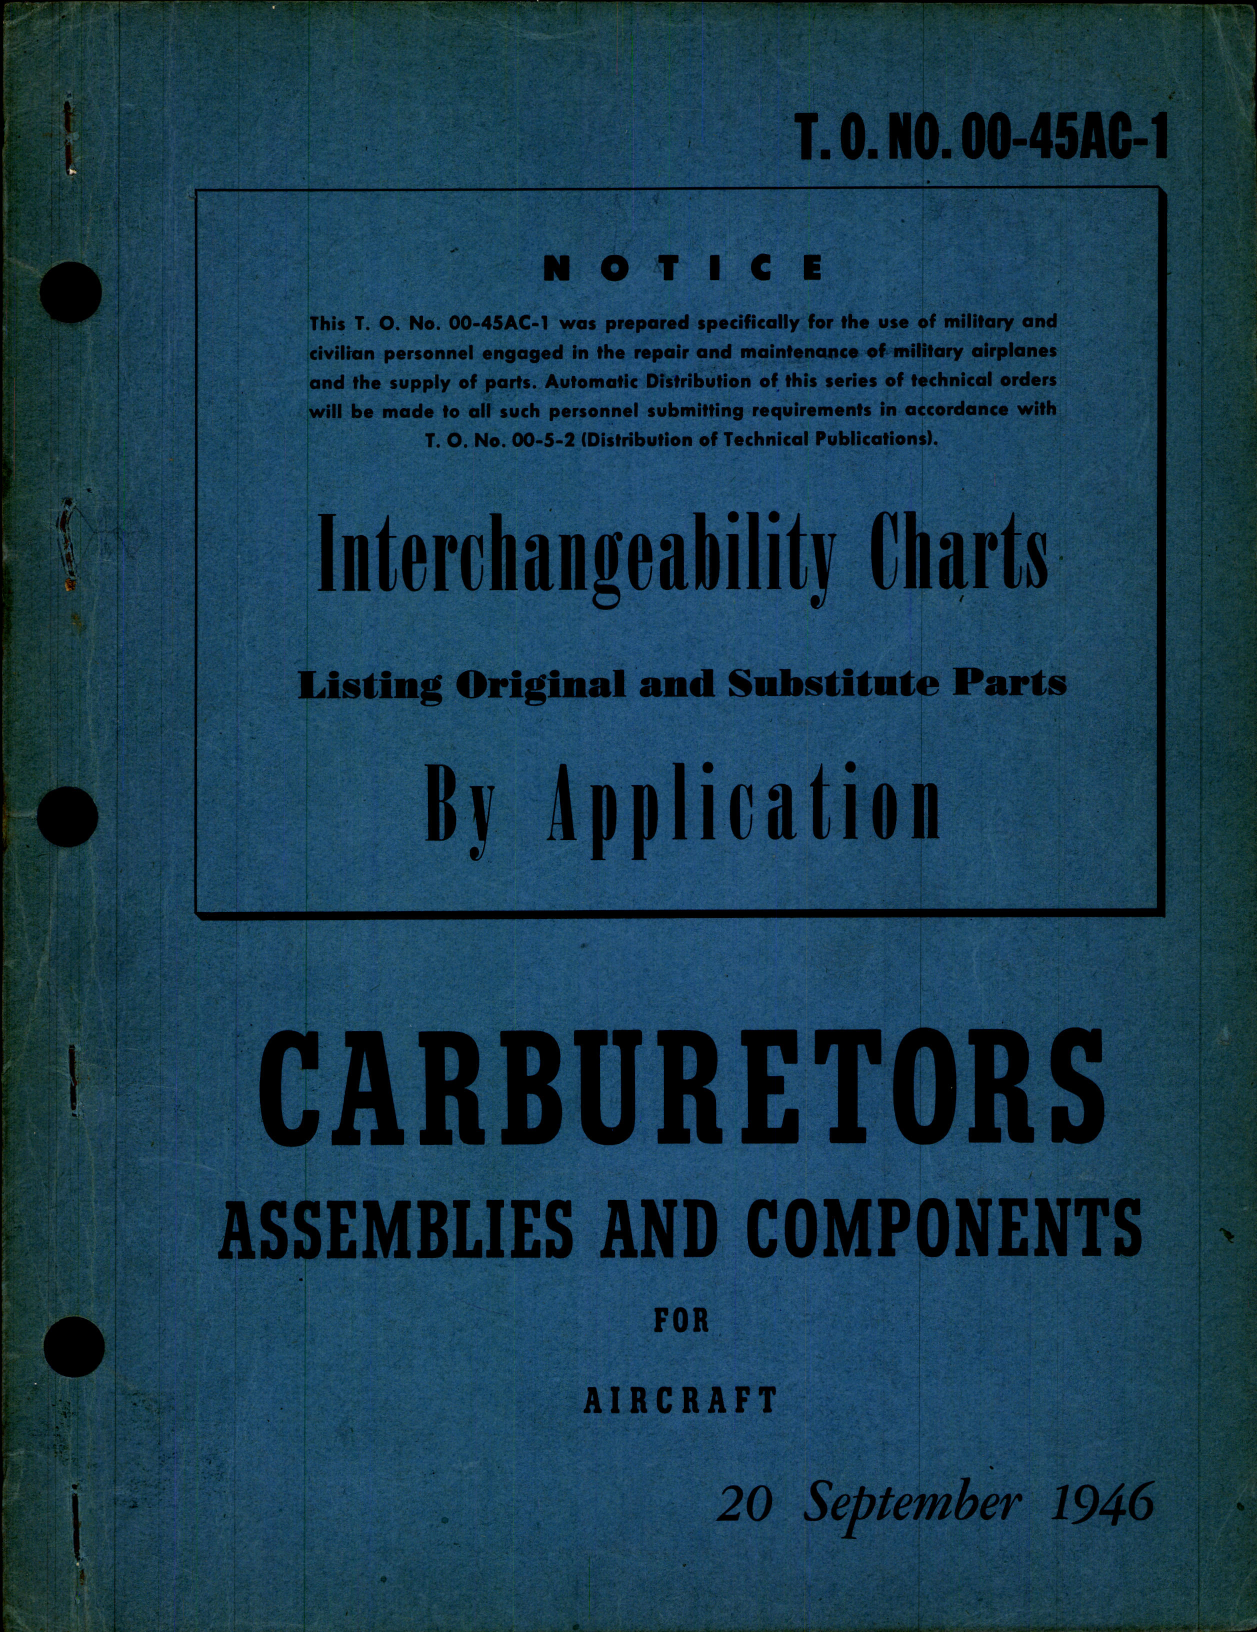 Sample page 1 from AirCorps Library document: Interchangeability Charts - Carburetors Assemblies and Components for Aircraft